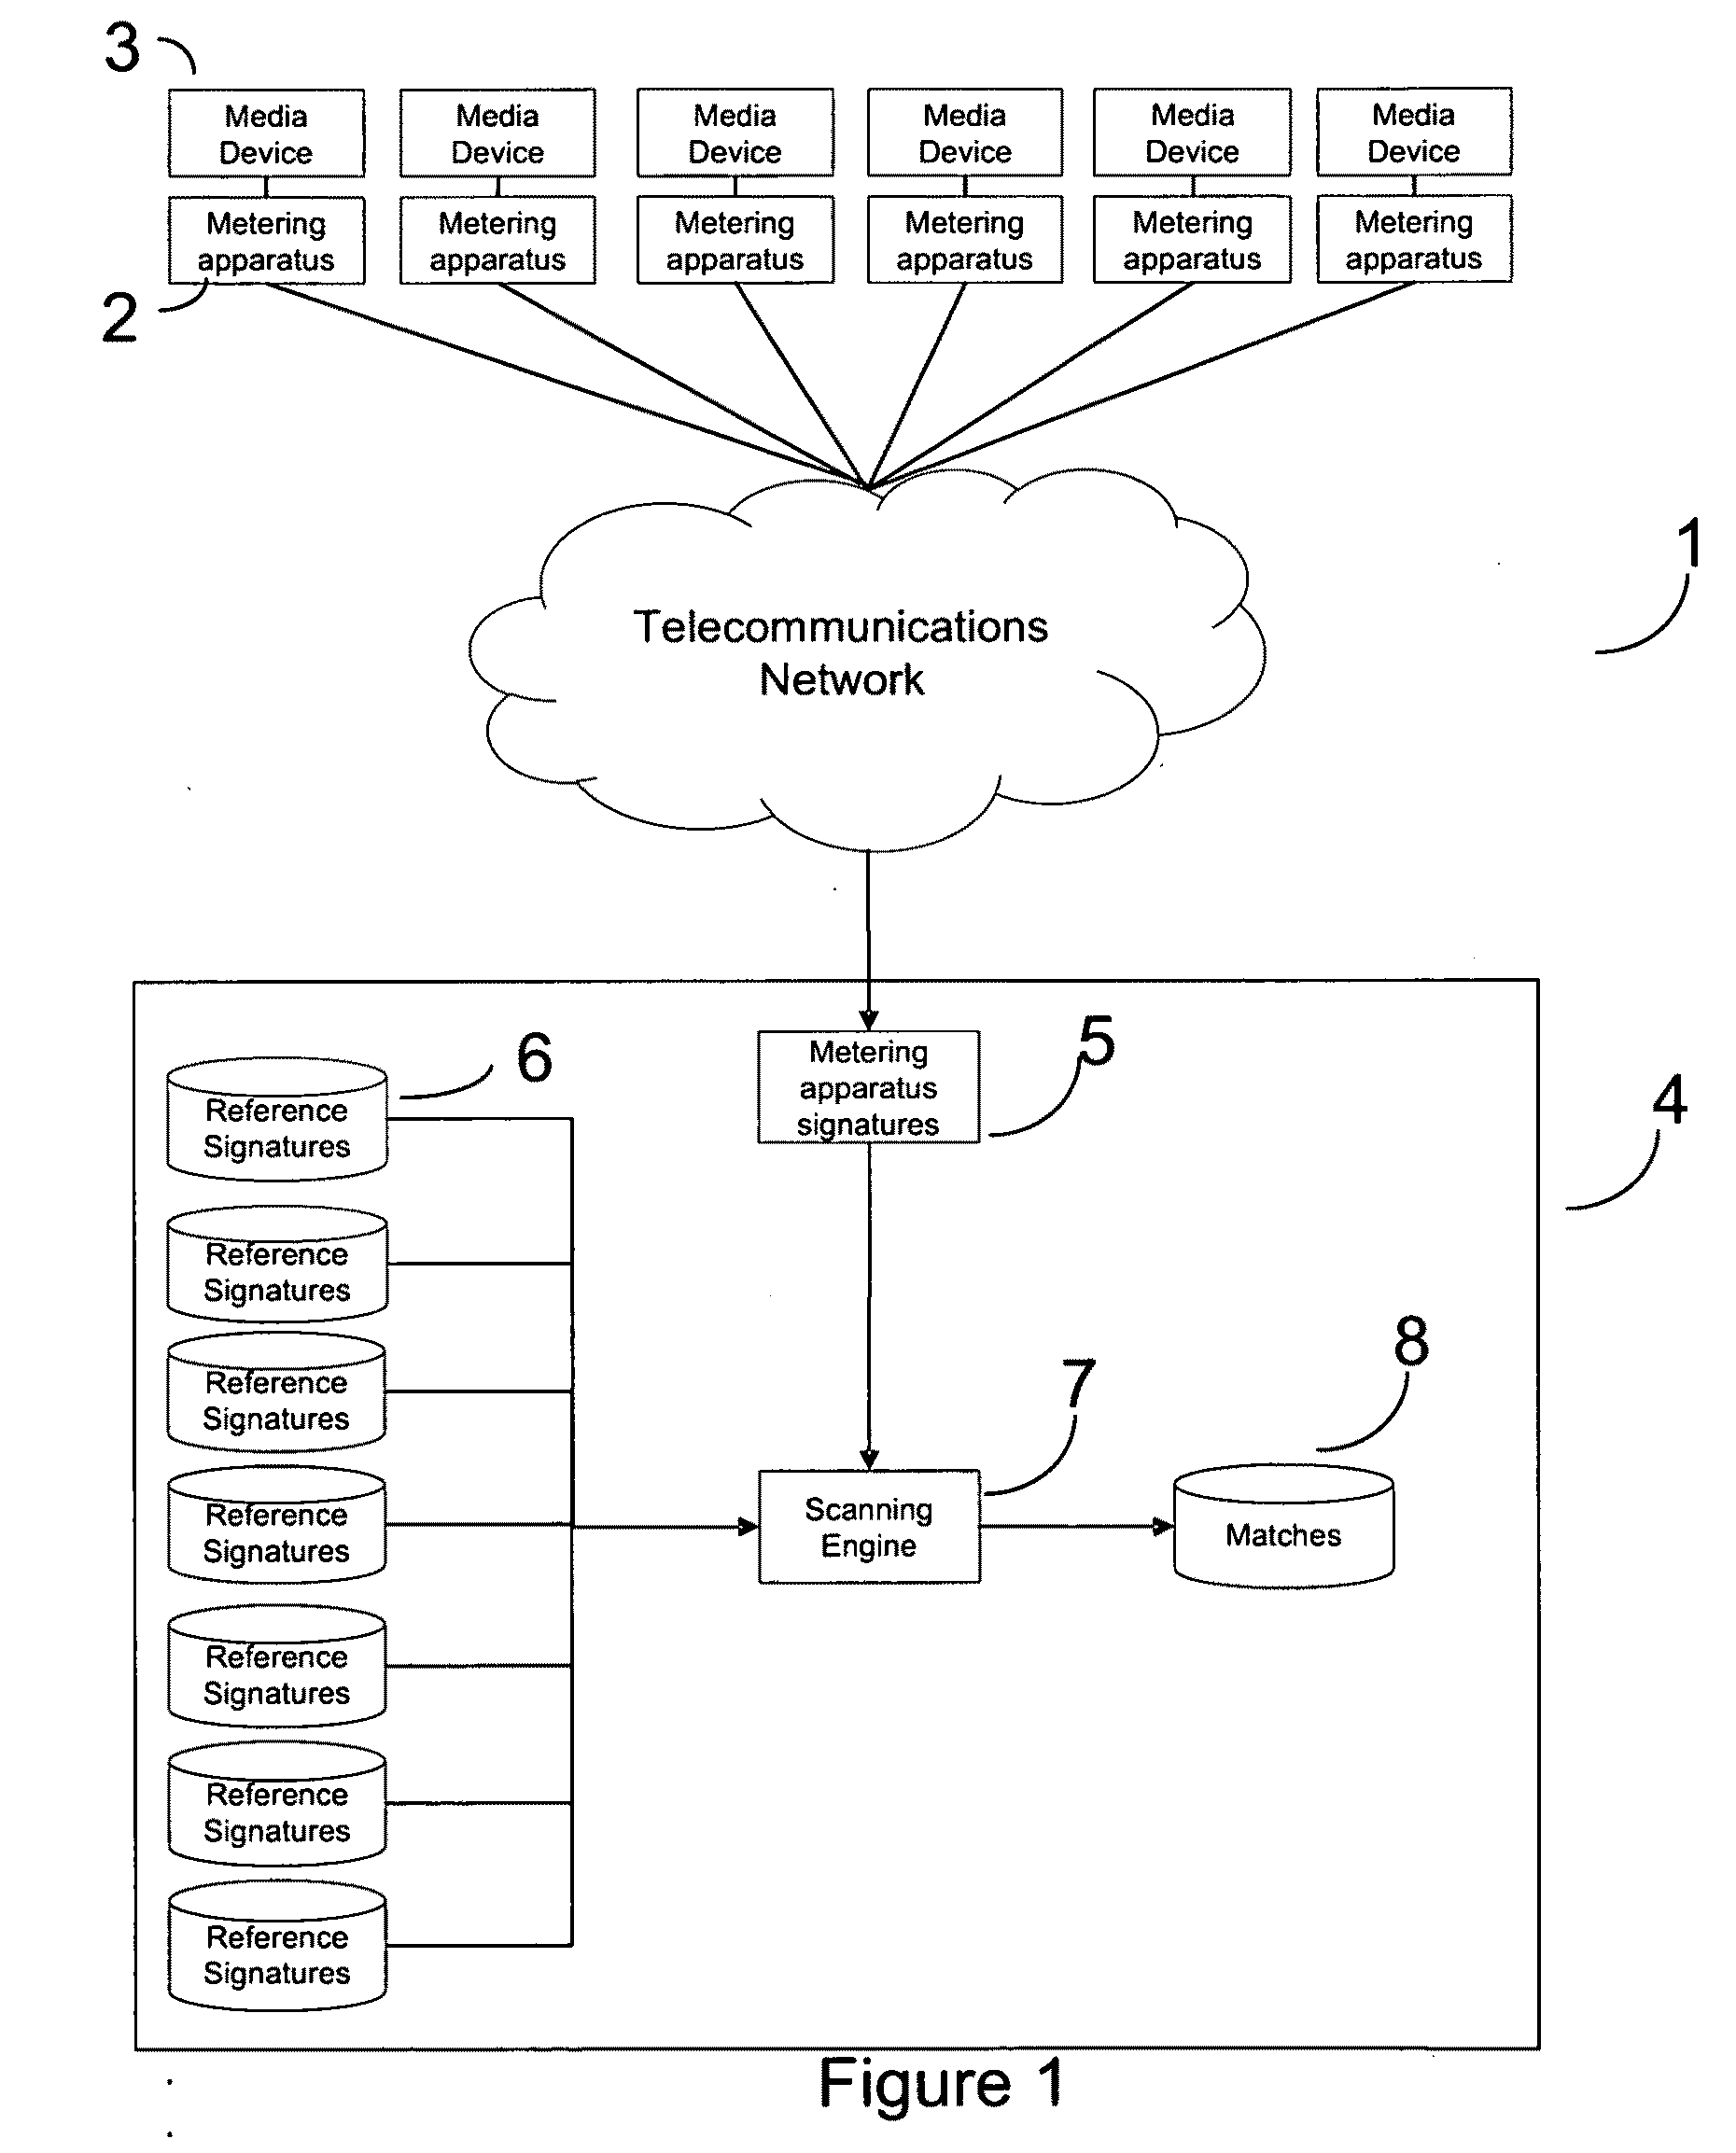 Simulcast resolution in content matching systems